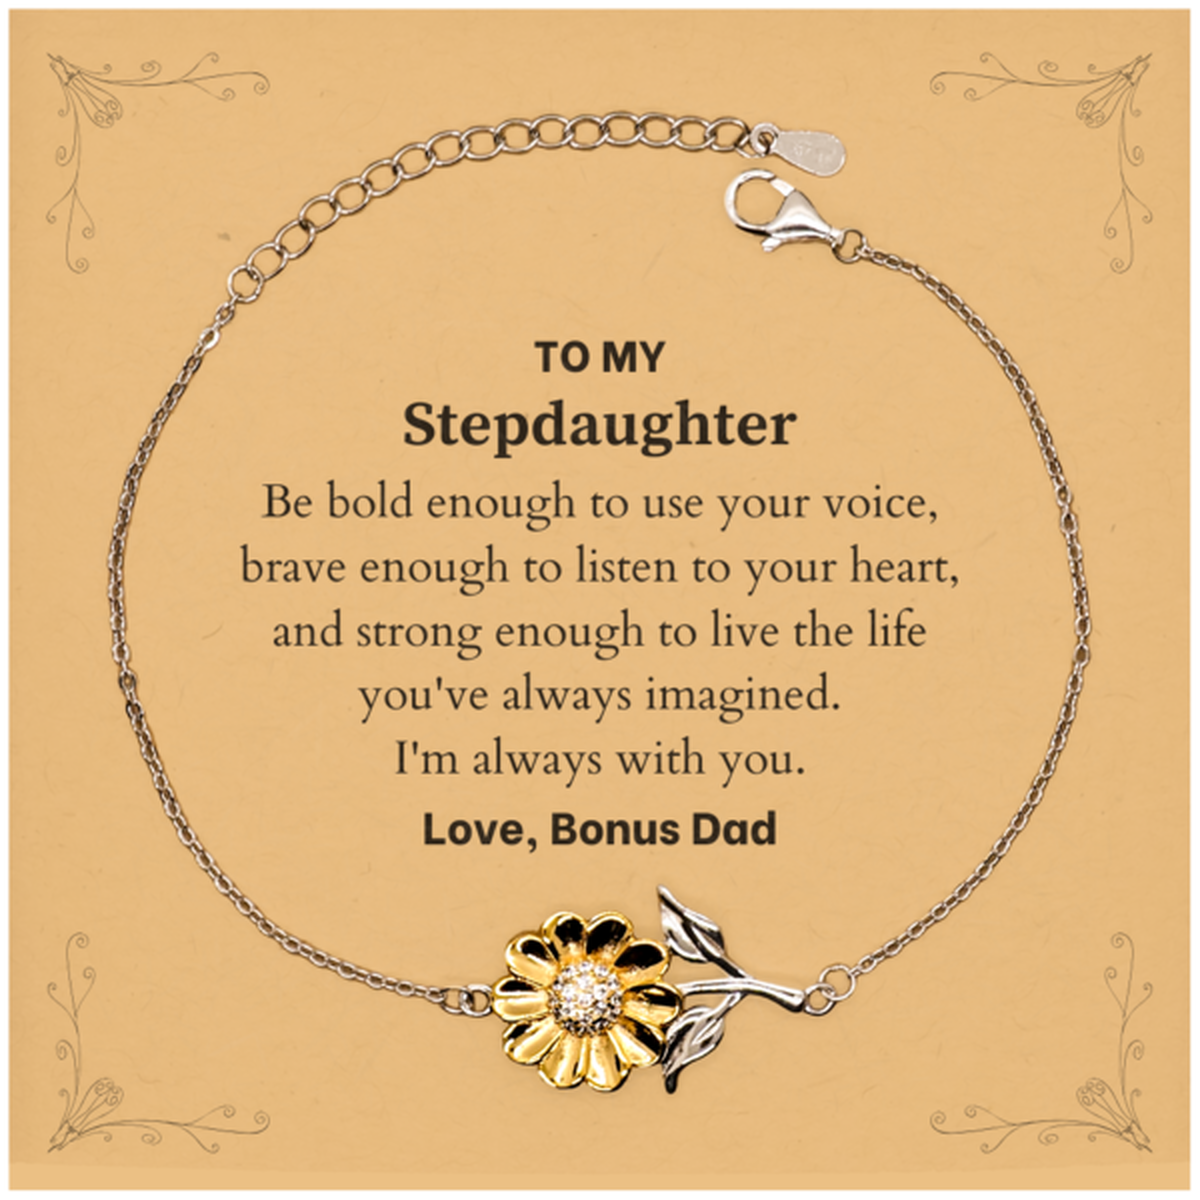 Keepsake Stepdaughter Sunflower Bracelet Gift Idea Graduation Christmas Birthday Stepdaughter from Bonus Dad, Stepdaughter Be bold enough to use your voice, brave enough to listen to your heart. Love, Bonus Dad